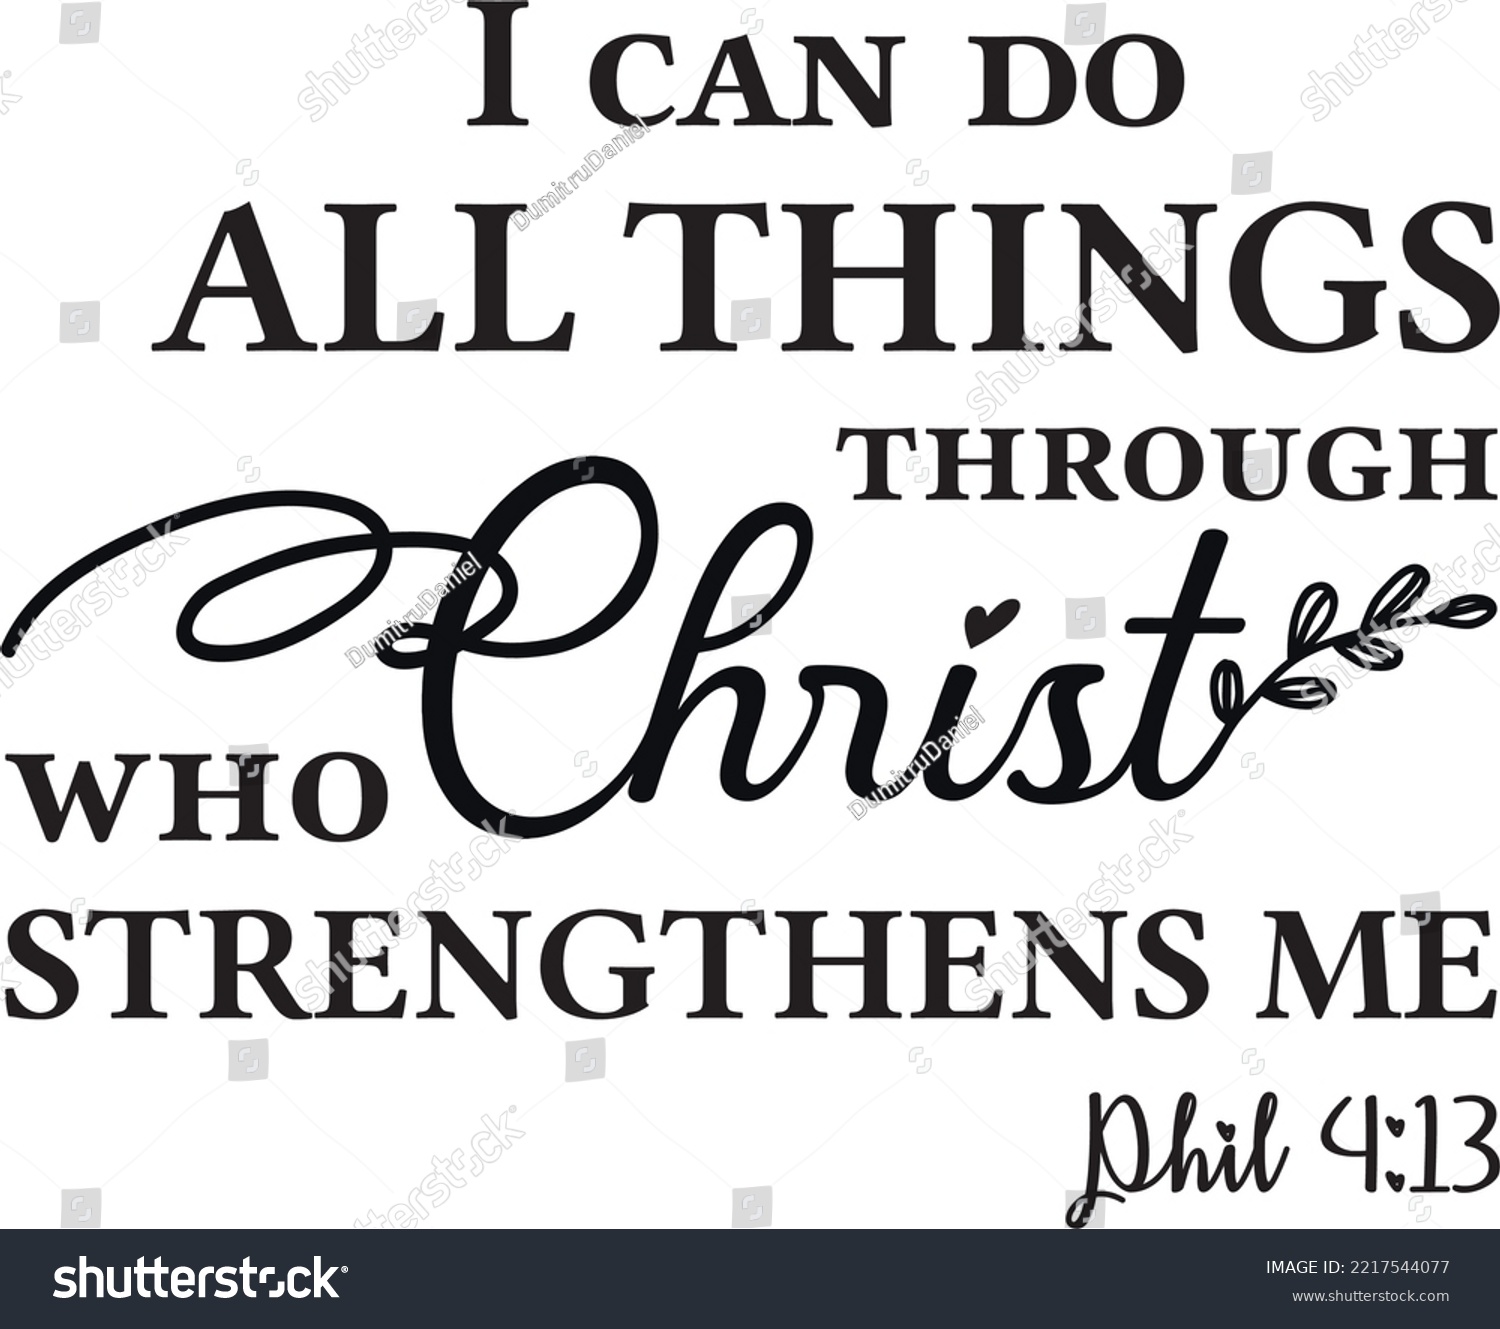 SVG of I can do all things Through Christ who strenghens me, Phil 4;13 vector, wording design, lettering, beautiful quotes, wall decals, wall artwork, poster design isolated svg